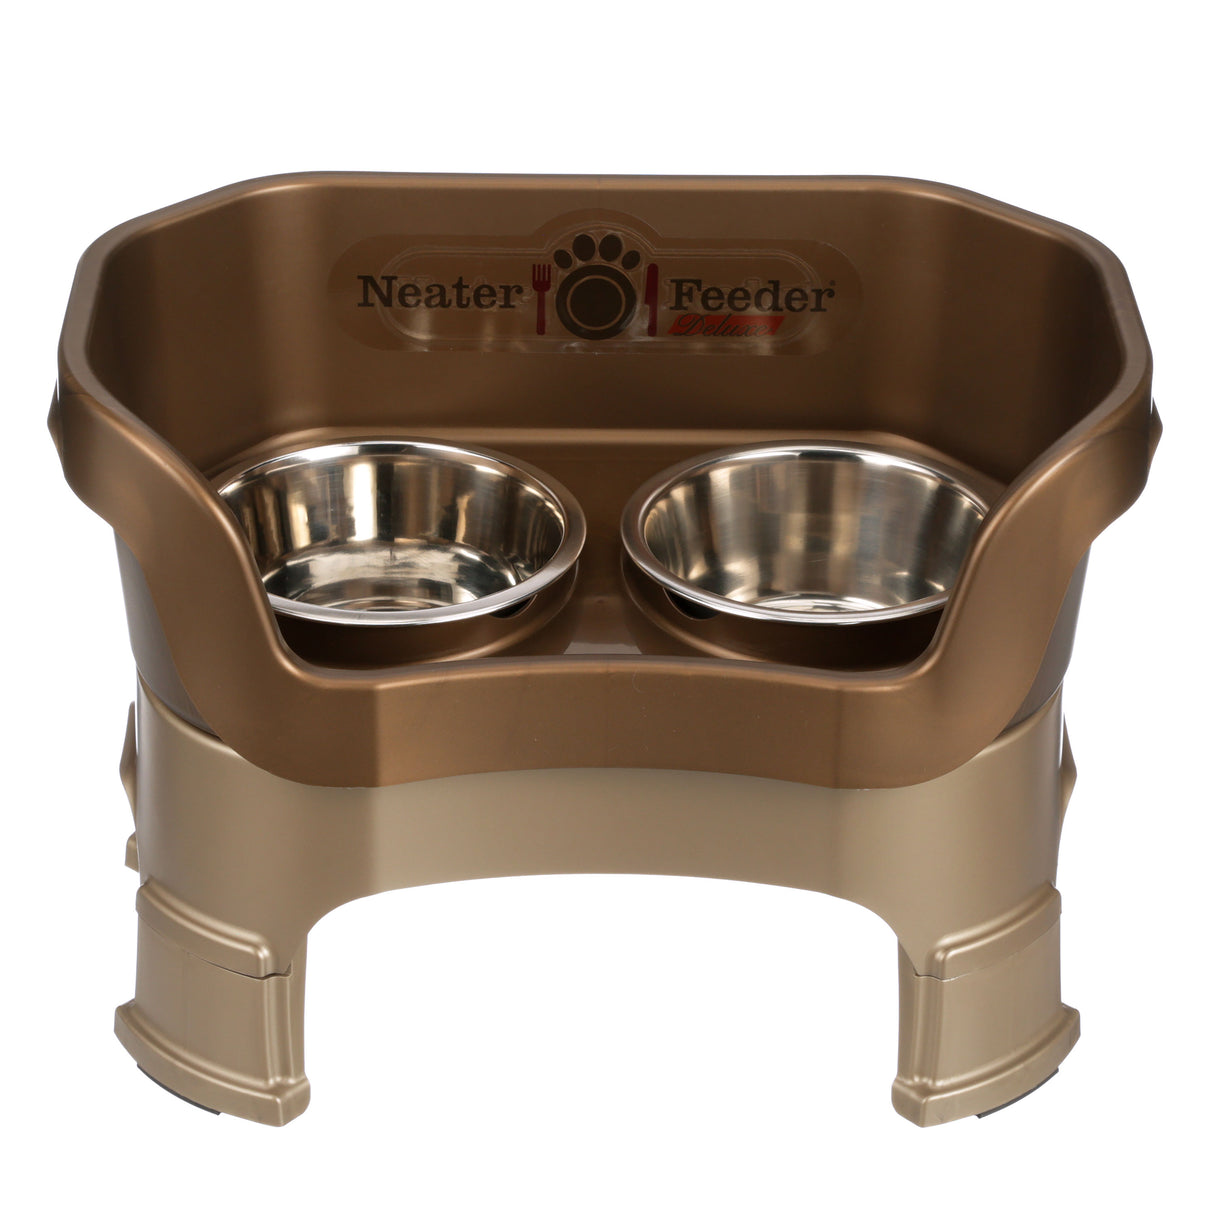 Deluxe Medium Dog Bronze raised Neater Feeder with leg extensions dog bowls